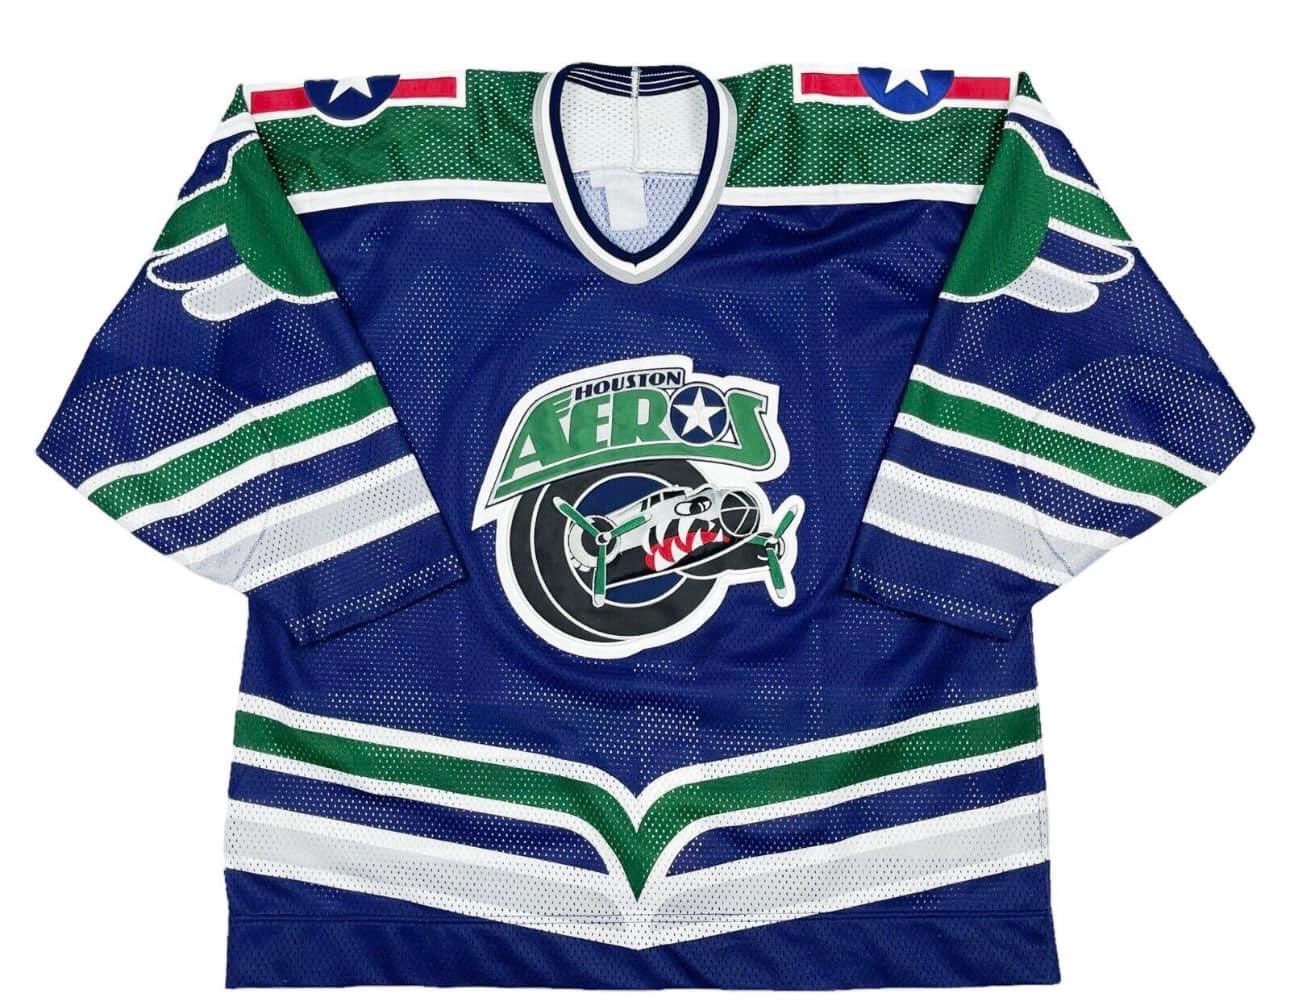 Bring Aeros Hockey Back to Houston - This rebrand here is one of